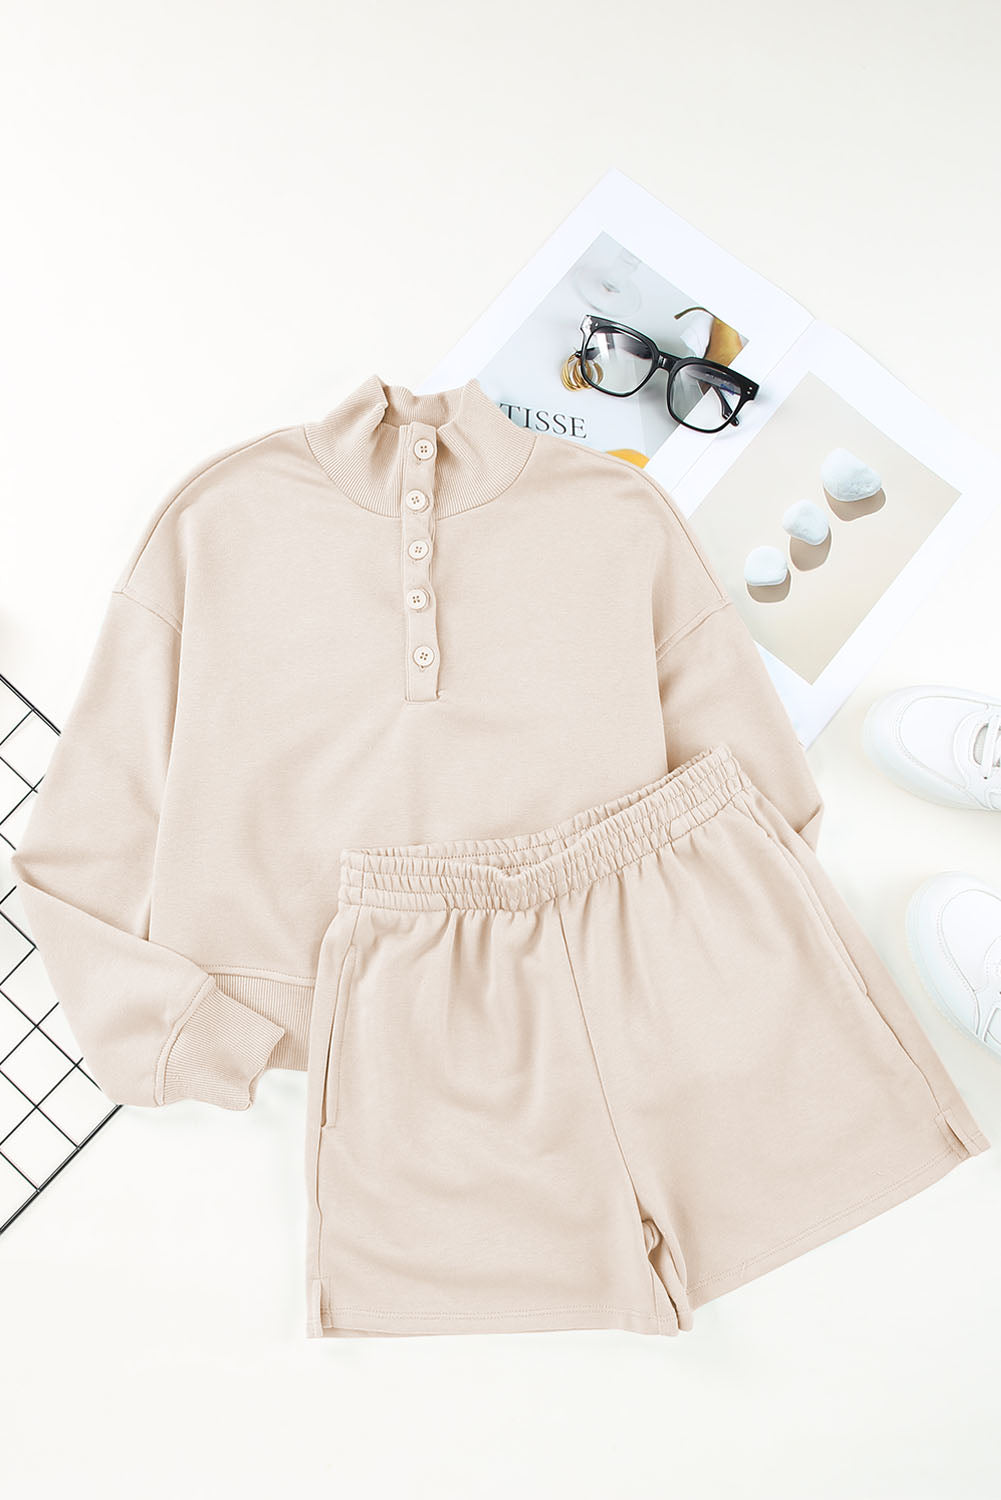 Apricot Casual High Neck Henley Top and Short Outfit